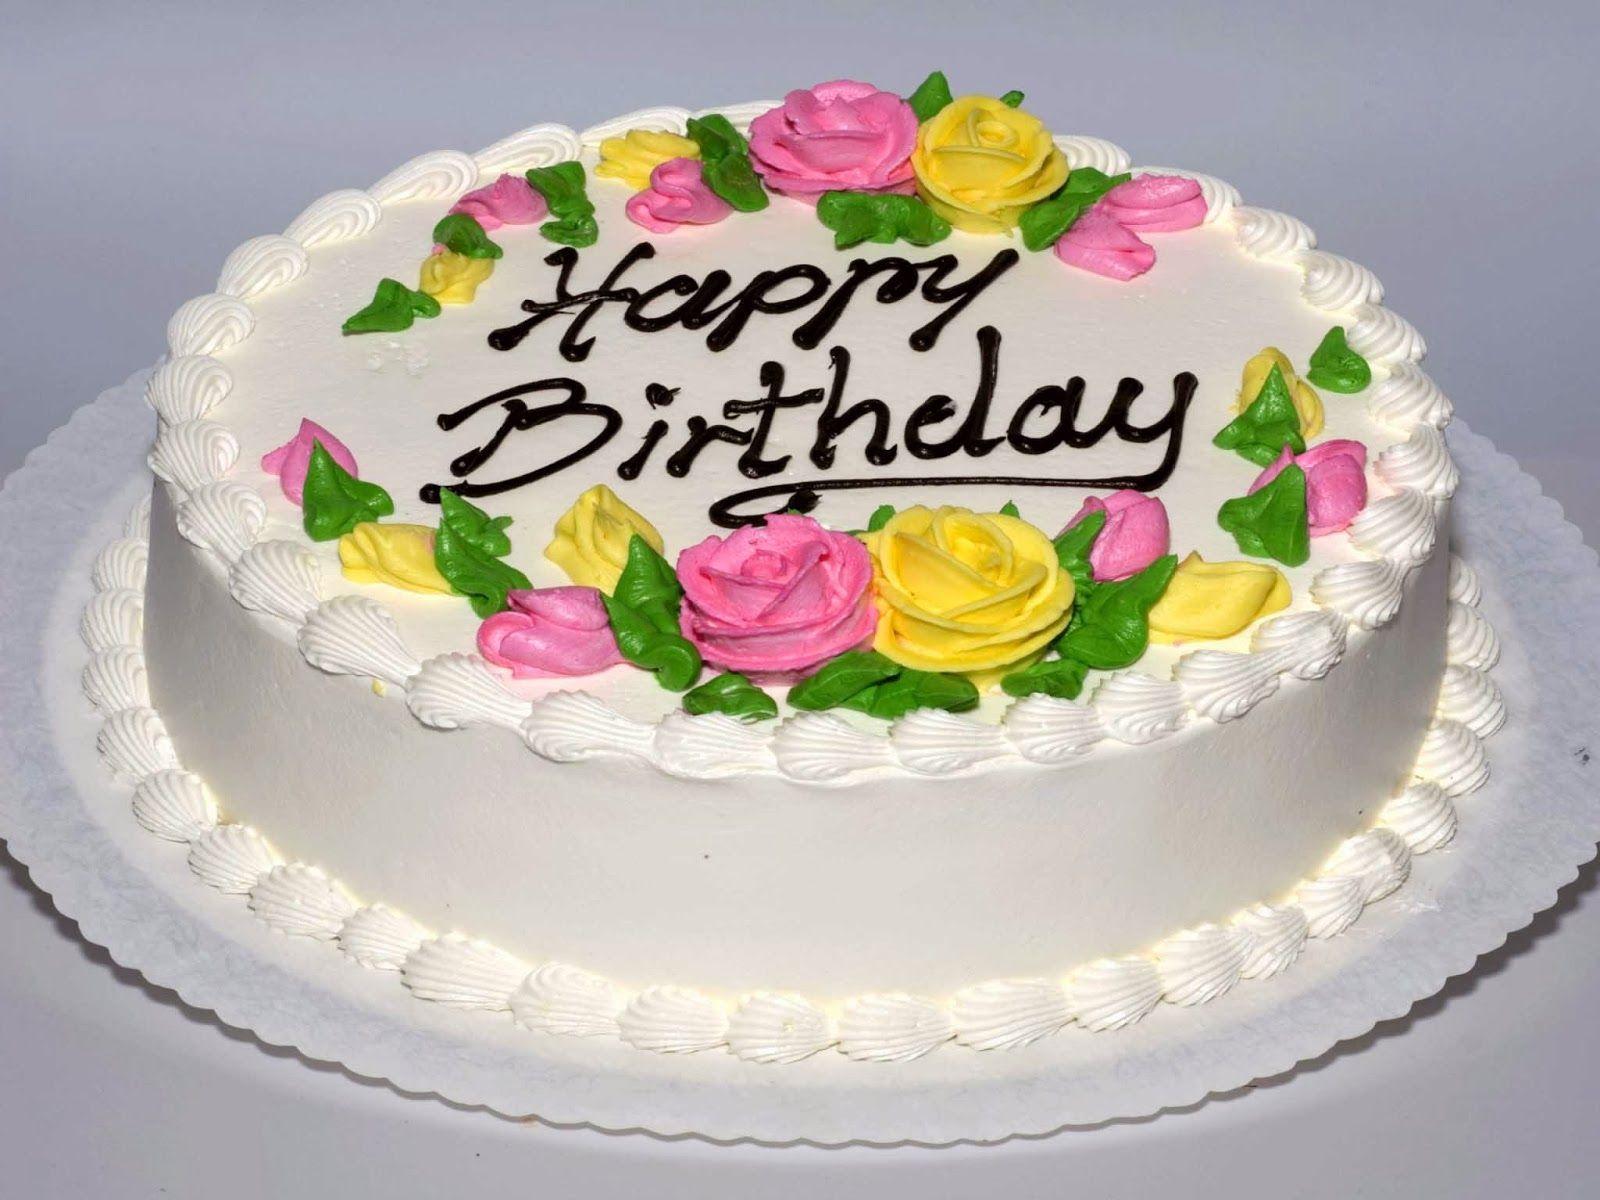 happy birthday cakes picture download. Happy Birthday Greetings